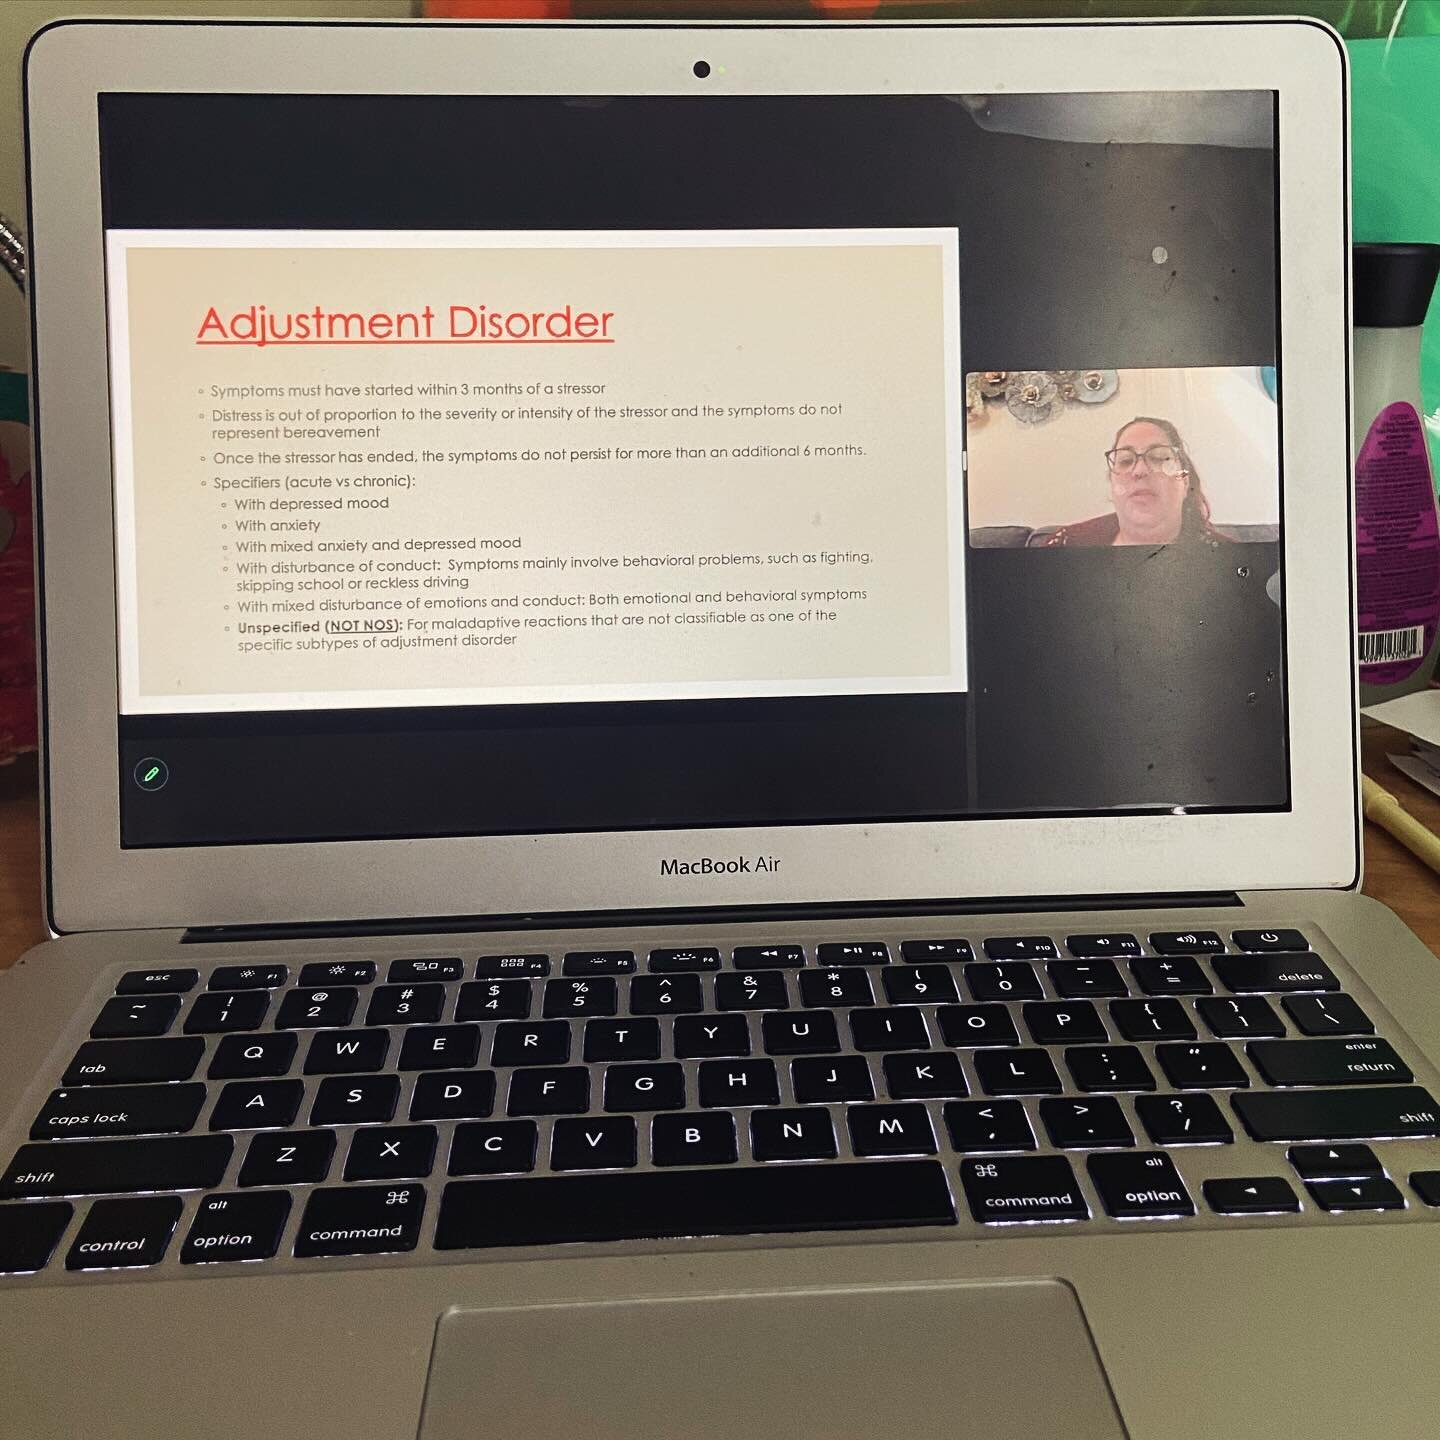 @_allie_danielle_ thank you so much for this valuable presentation on updated diagnostic criteria! 
At MLT we are life long learners, seeking the latest and most impactful information and evidence based practices. 
Please reach out if you would like 